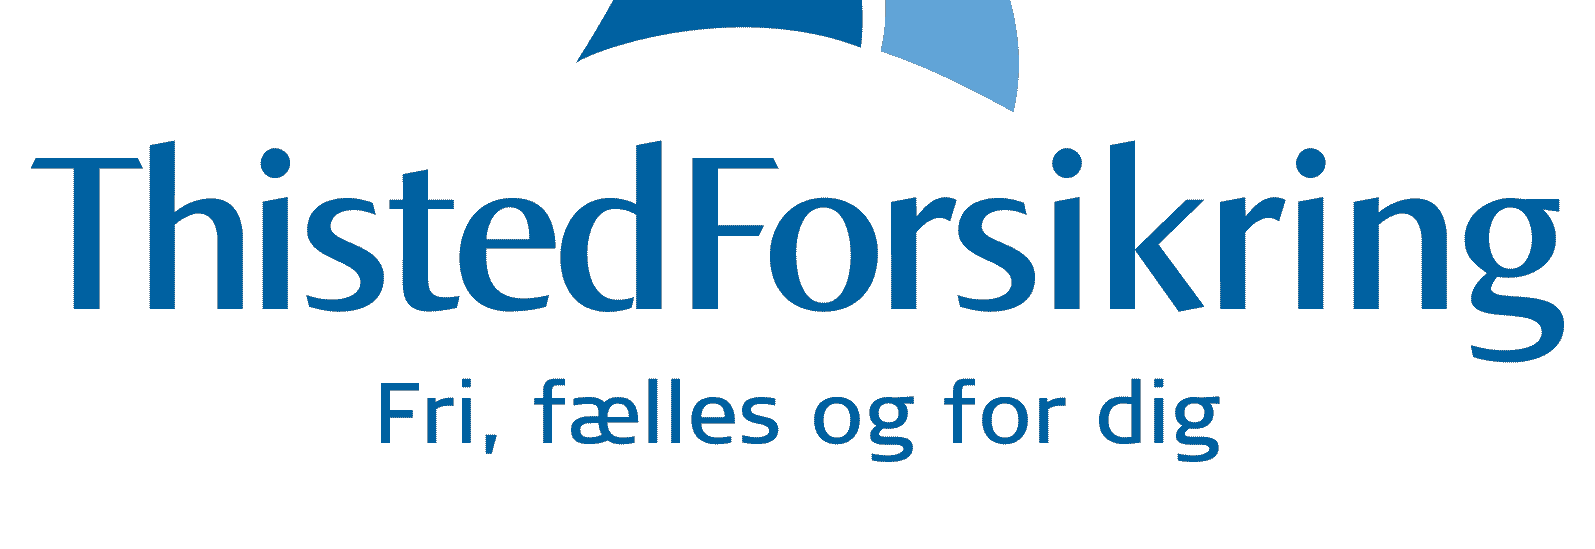 thisted forsikring logo.png